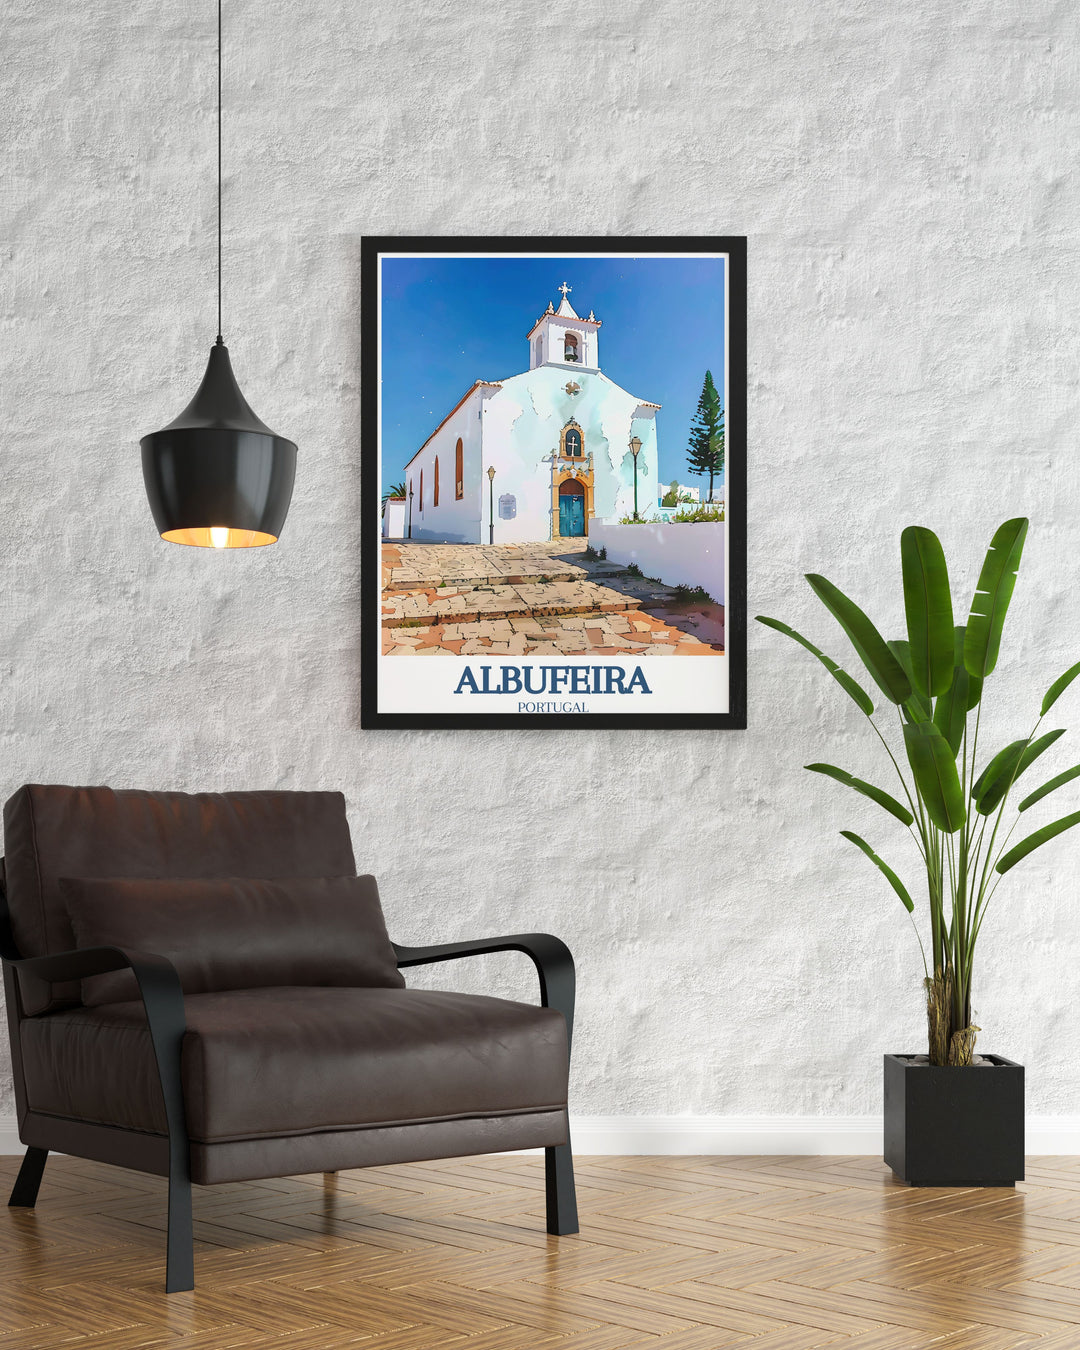 Scenic print of St Anna Church in Albufeira, offering a glimpse into the rich cultural heritage and serene beauty of this historic site.